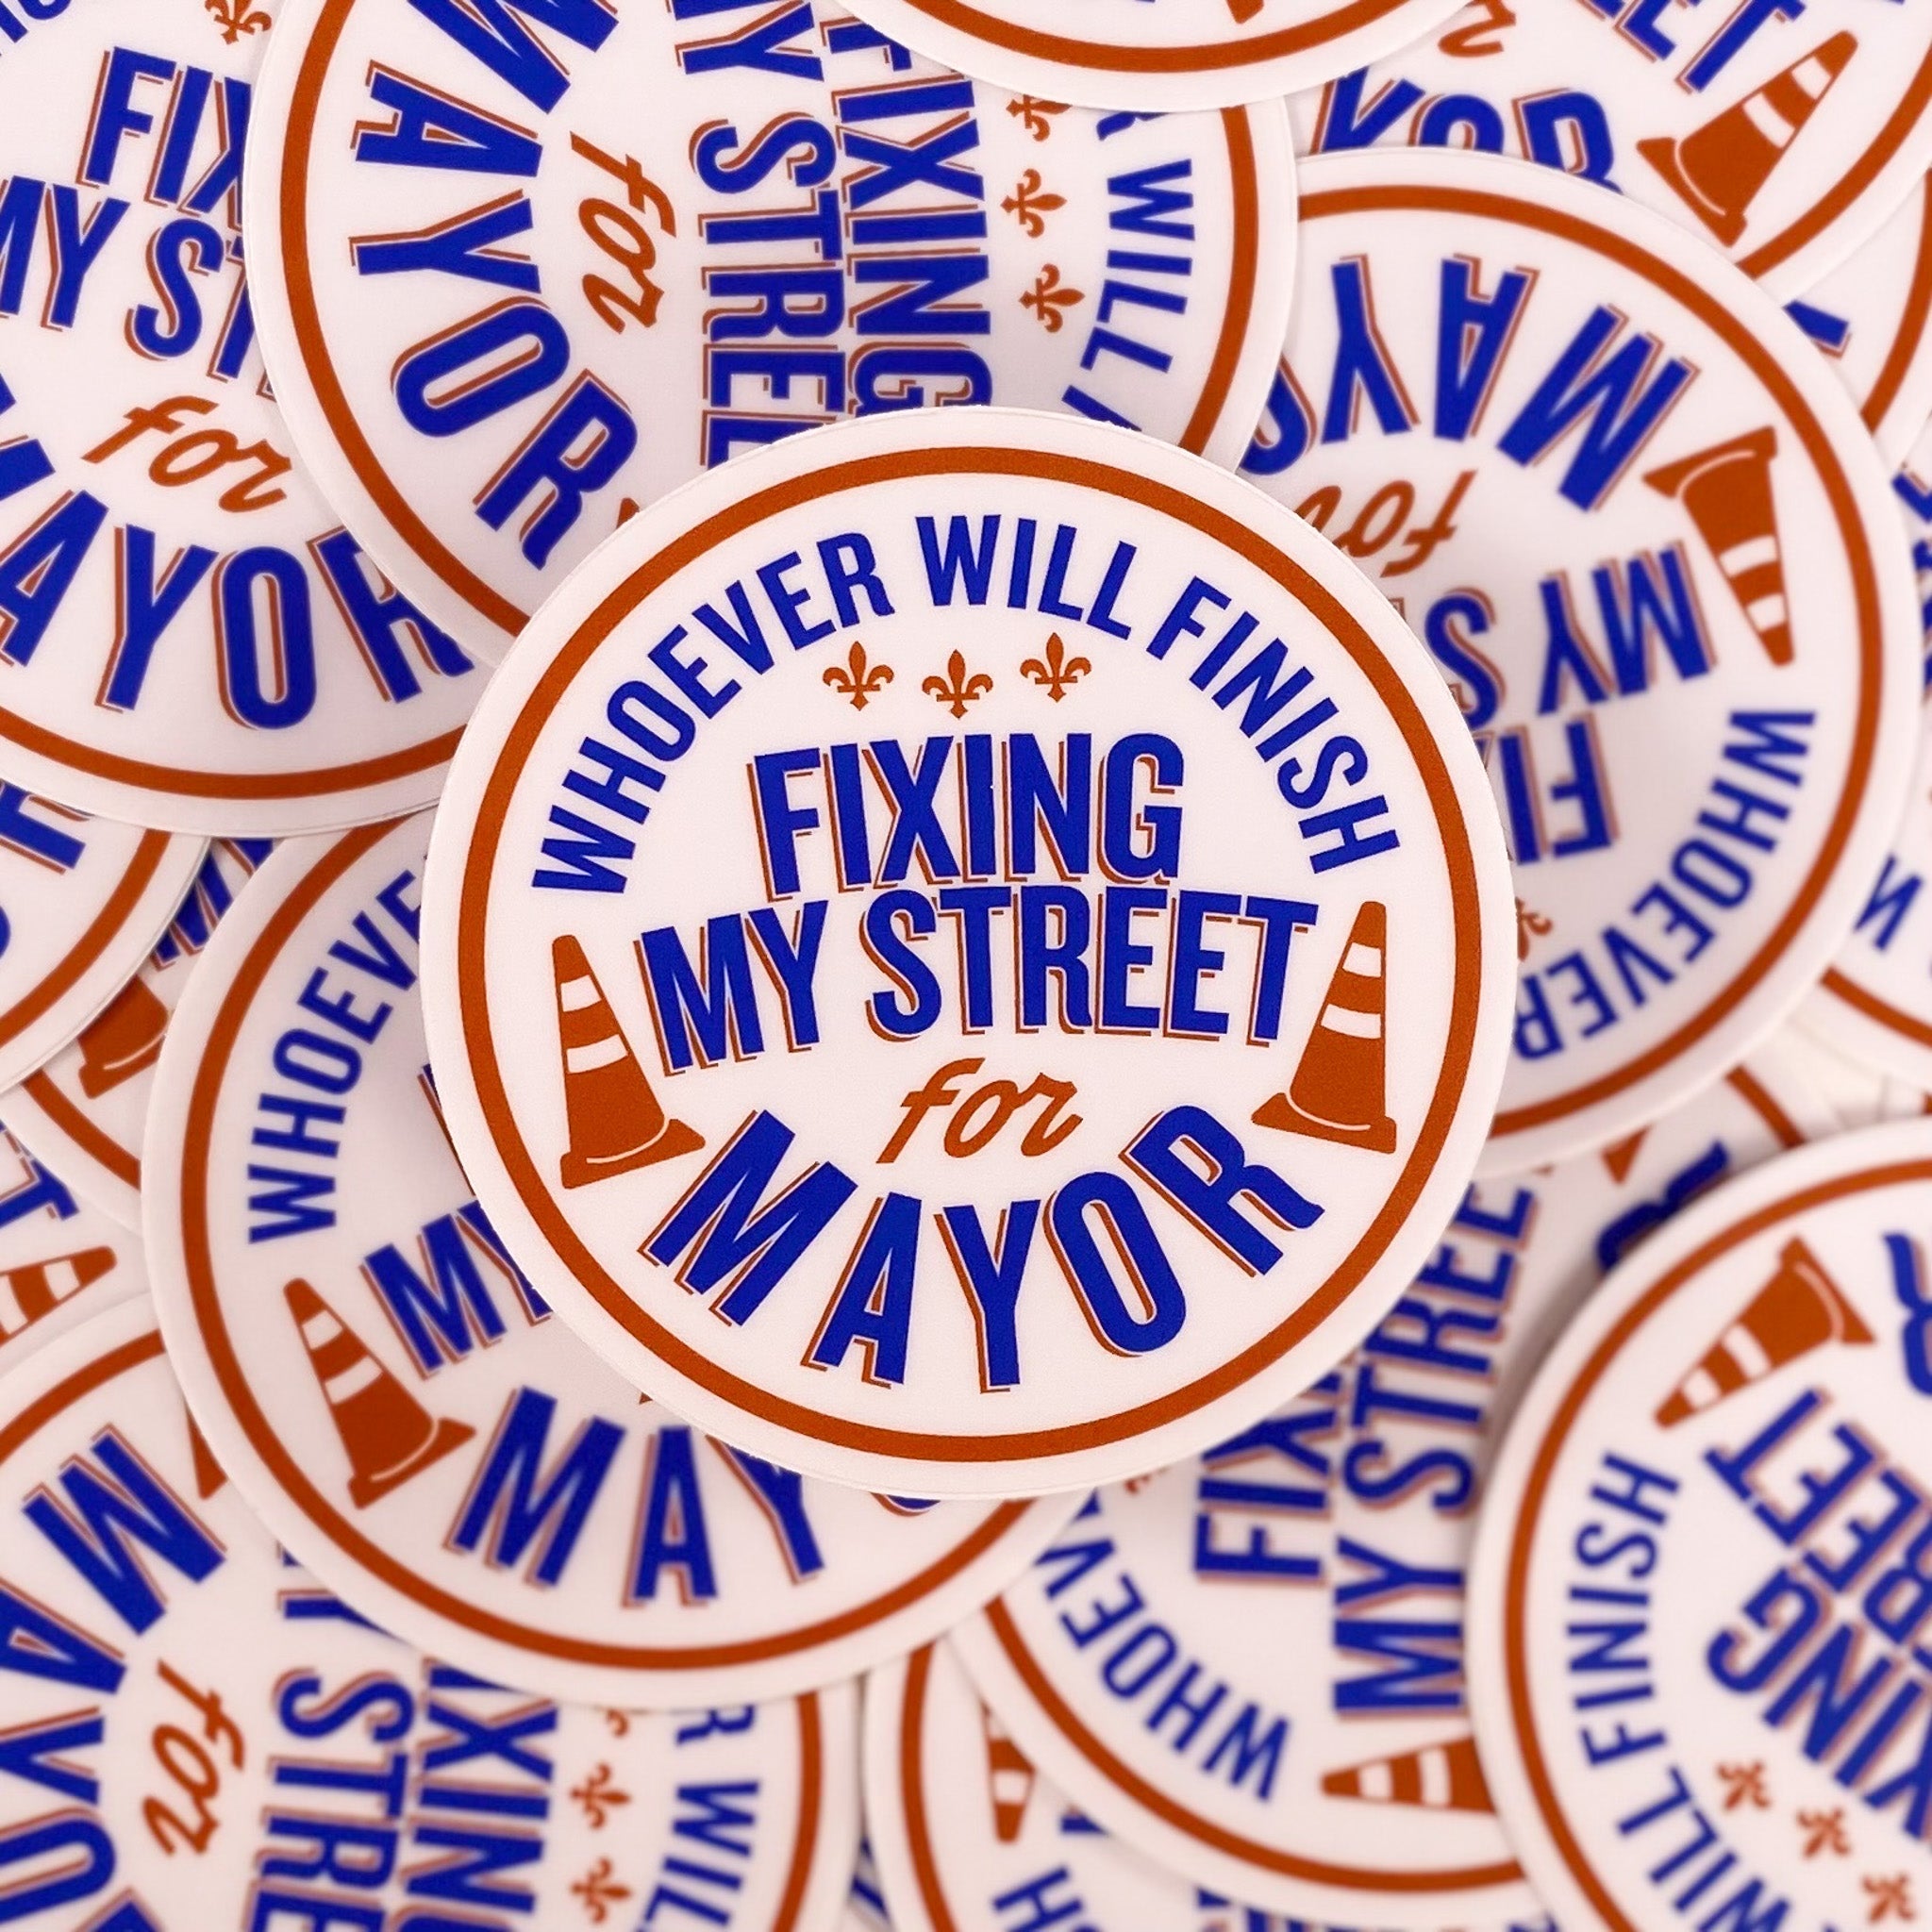 Whoever Fixes The Streets For Mayor sticker - Dirty Coast Press